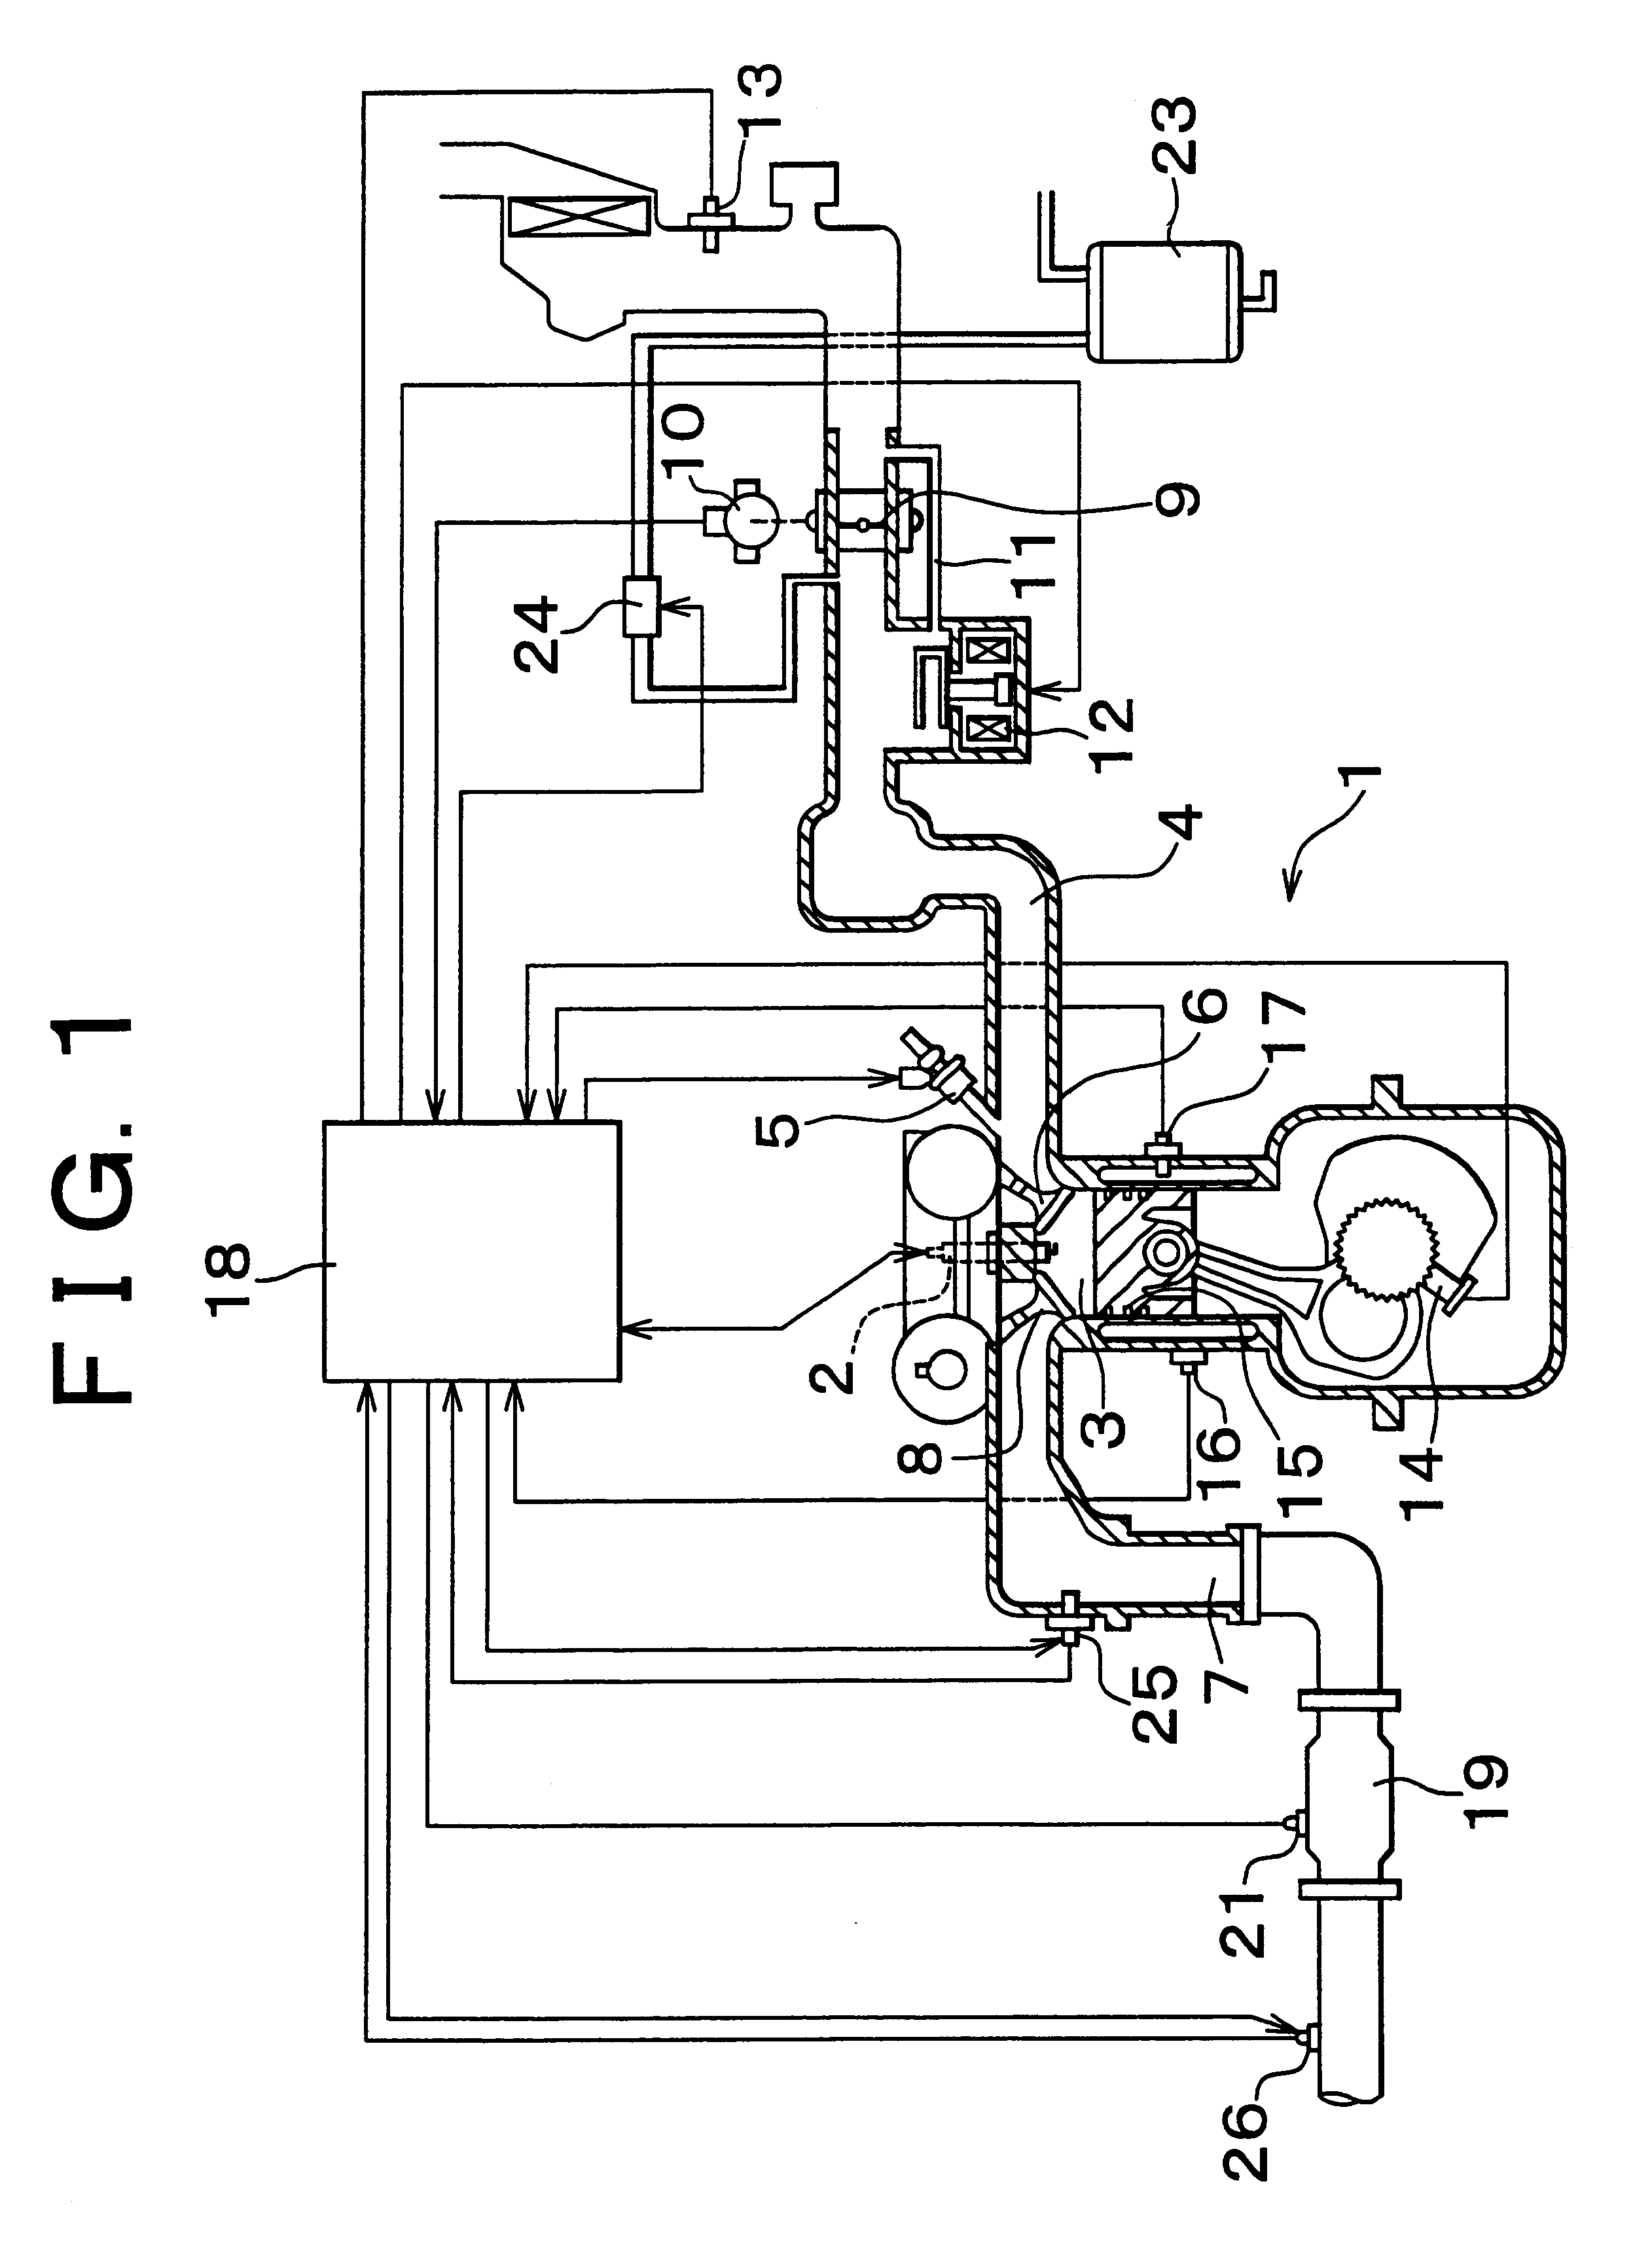 Air-fuel ratio control system for internal combustion engine and control method therof